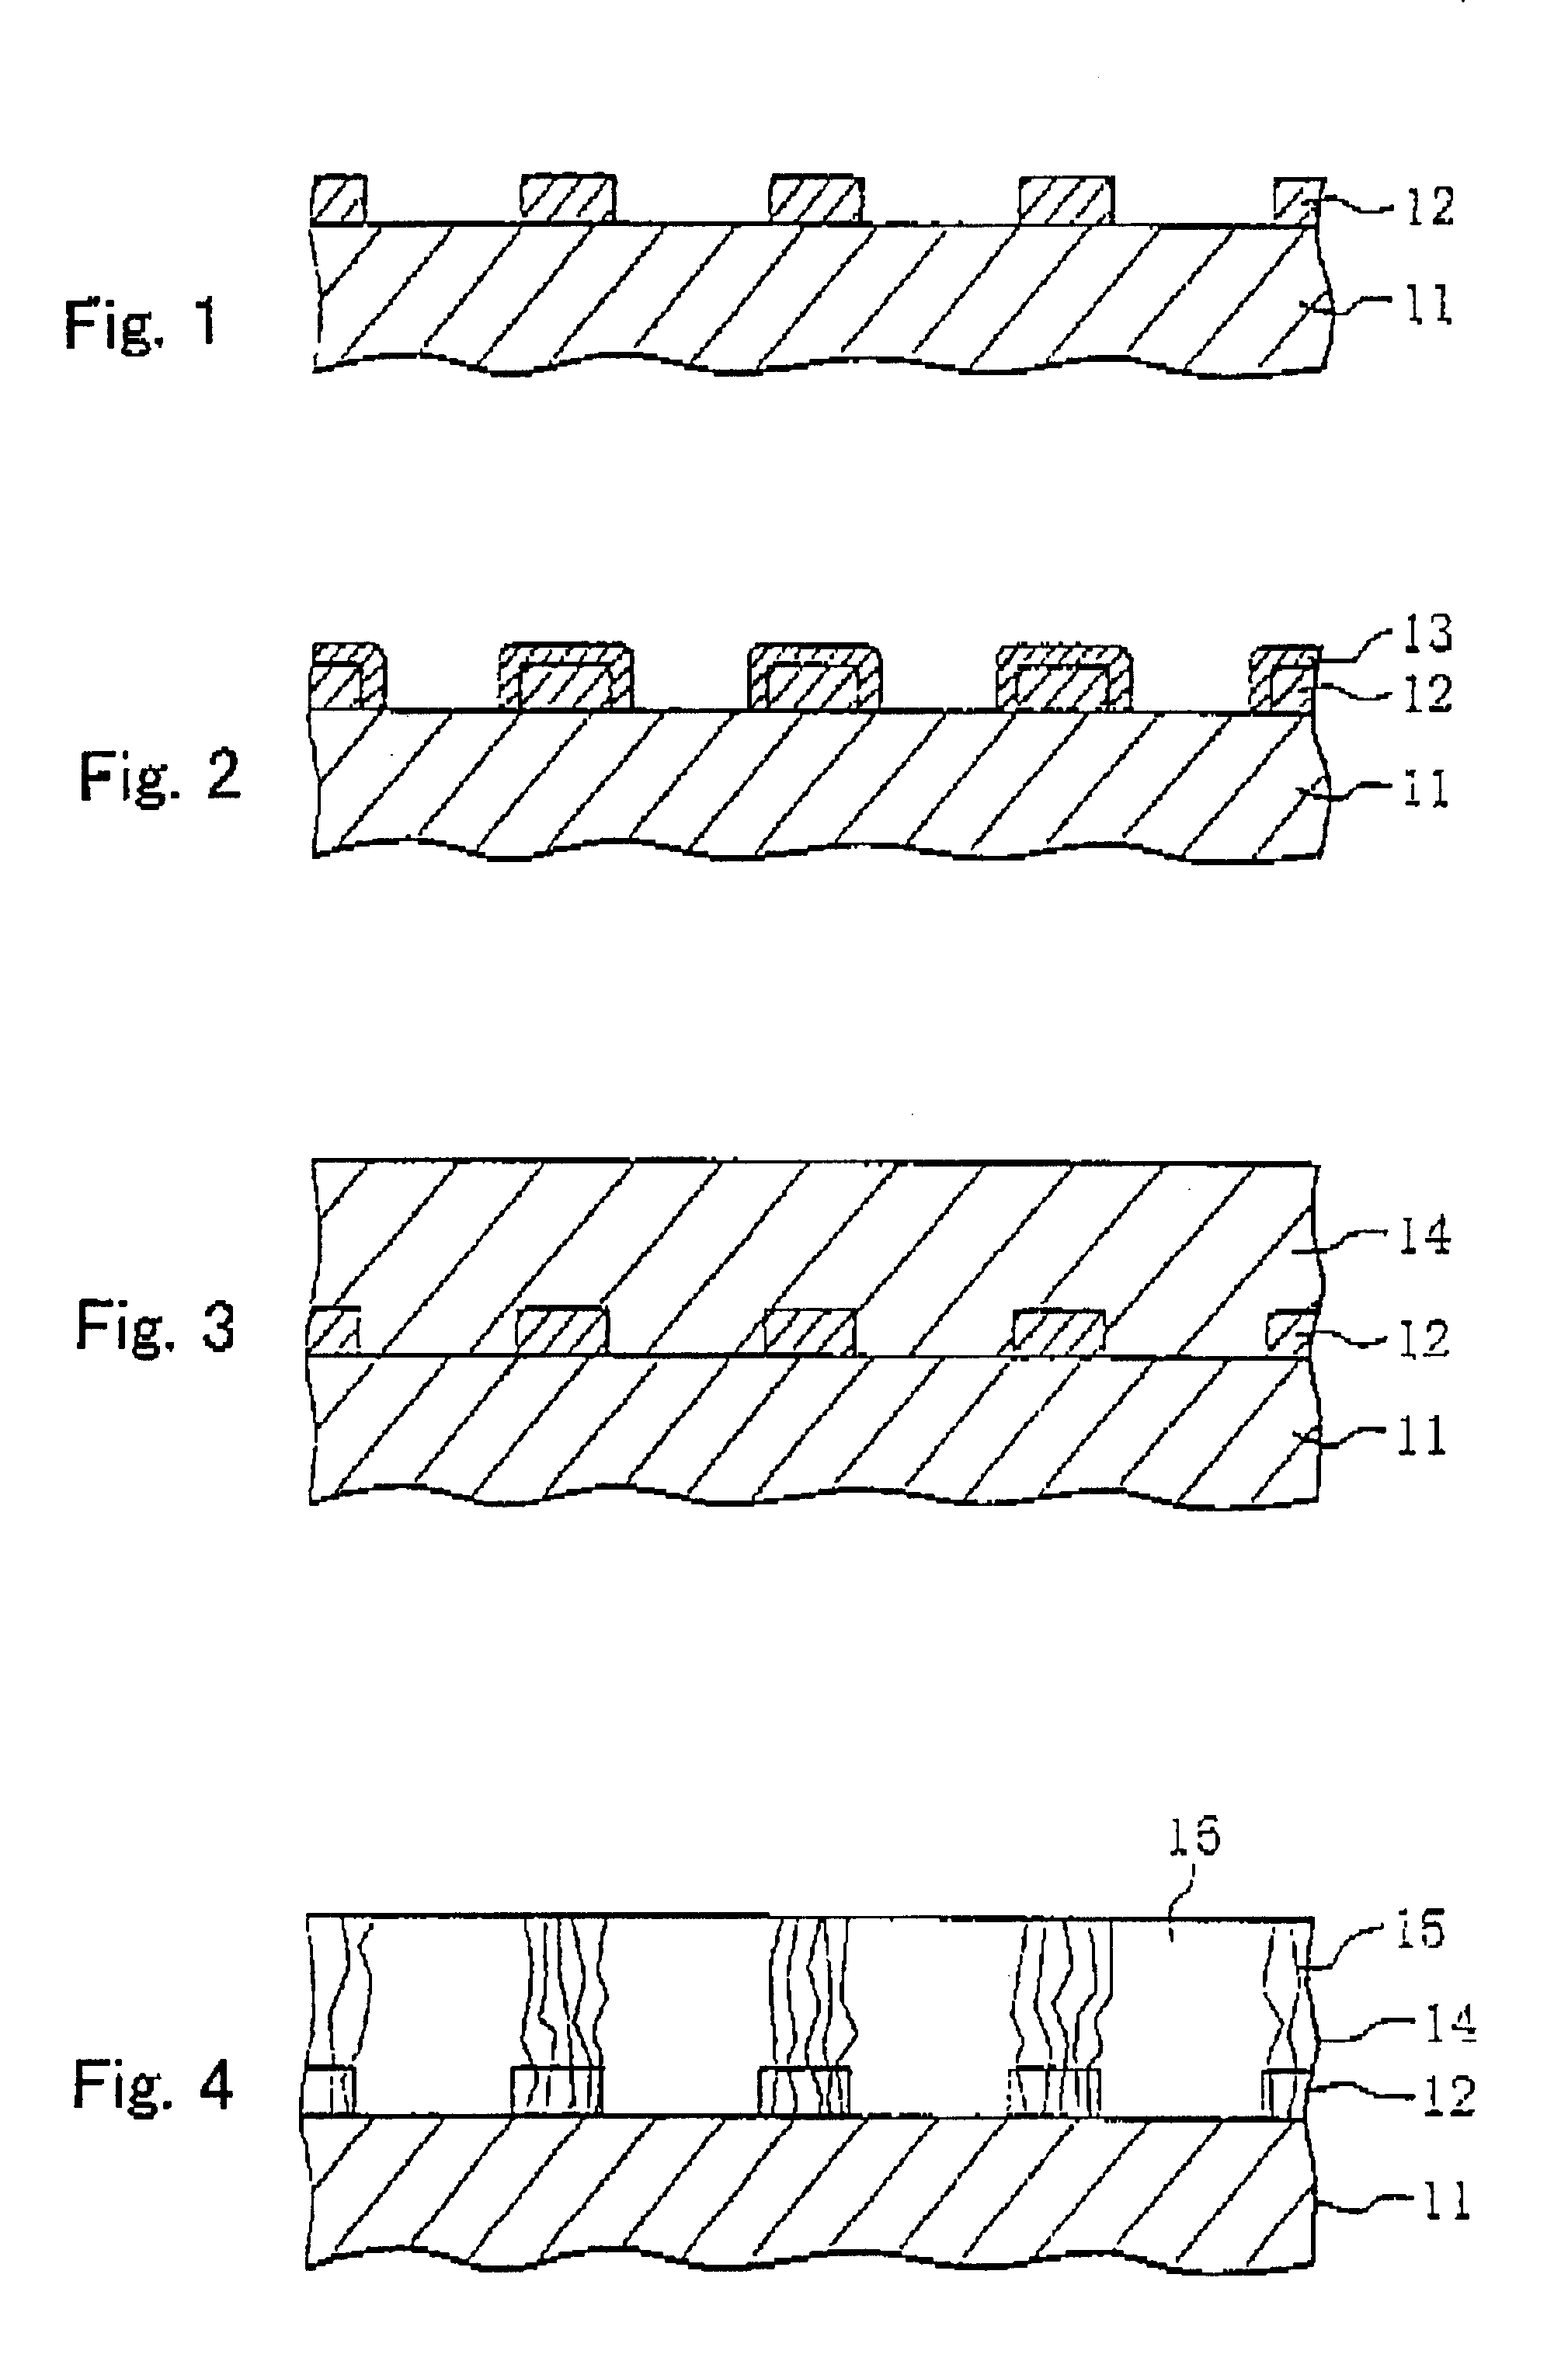 Semiconductor laser, semiconductor device, and their manufacture methods